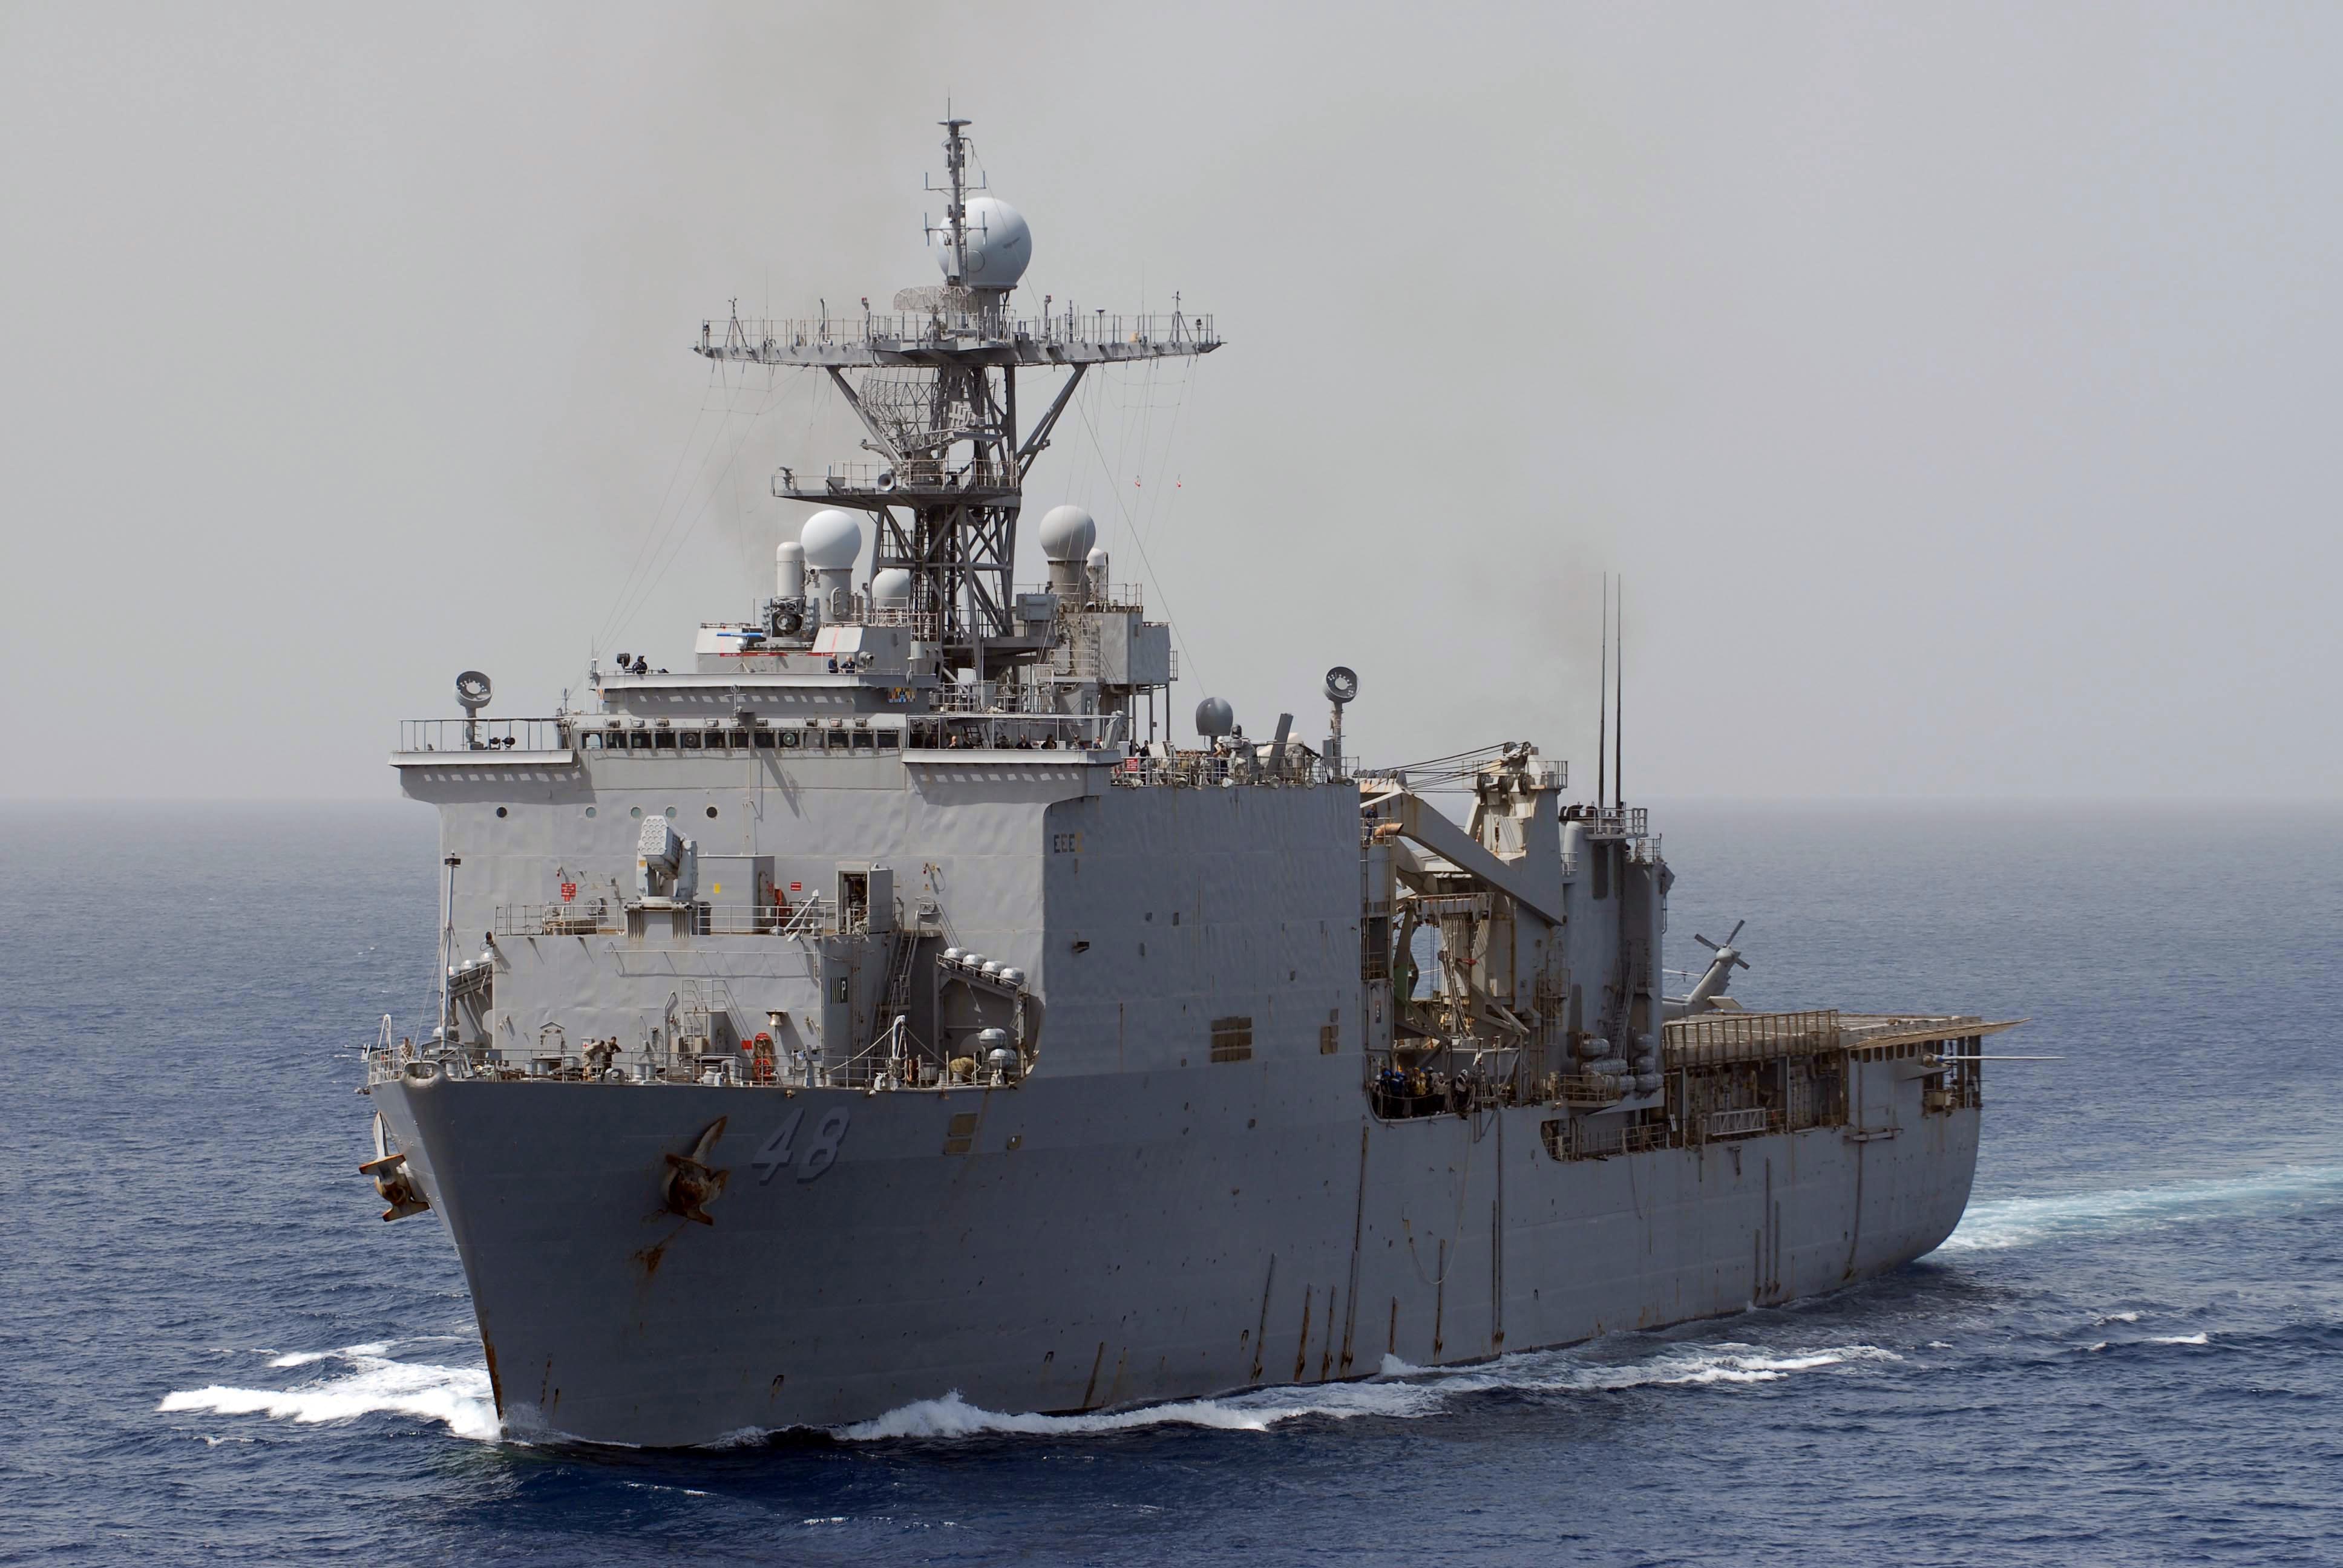 US_Navy_100228-N-3358S-054_The_amphibious_dock_landing_ship_USS_Ashland_(LSD_48)_prepares_for_an_underway_replenishment_with_the_Military_Sealift_Command_dry_cargo_and_ammunition_ship_USNS_Robert_E._Peary_(T-AKE_5).jpg